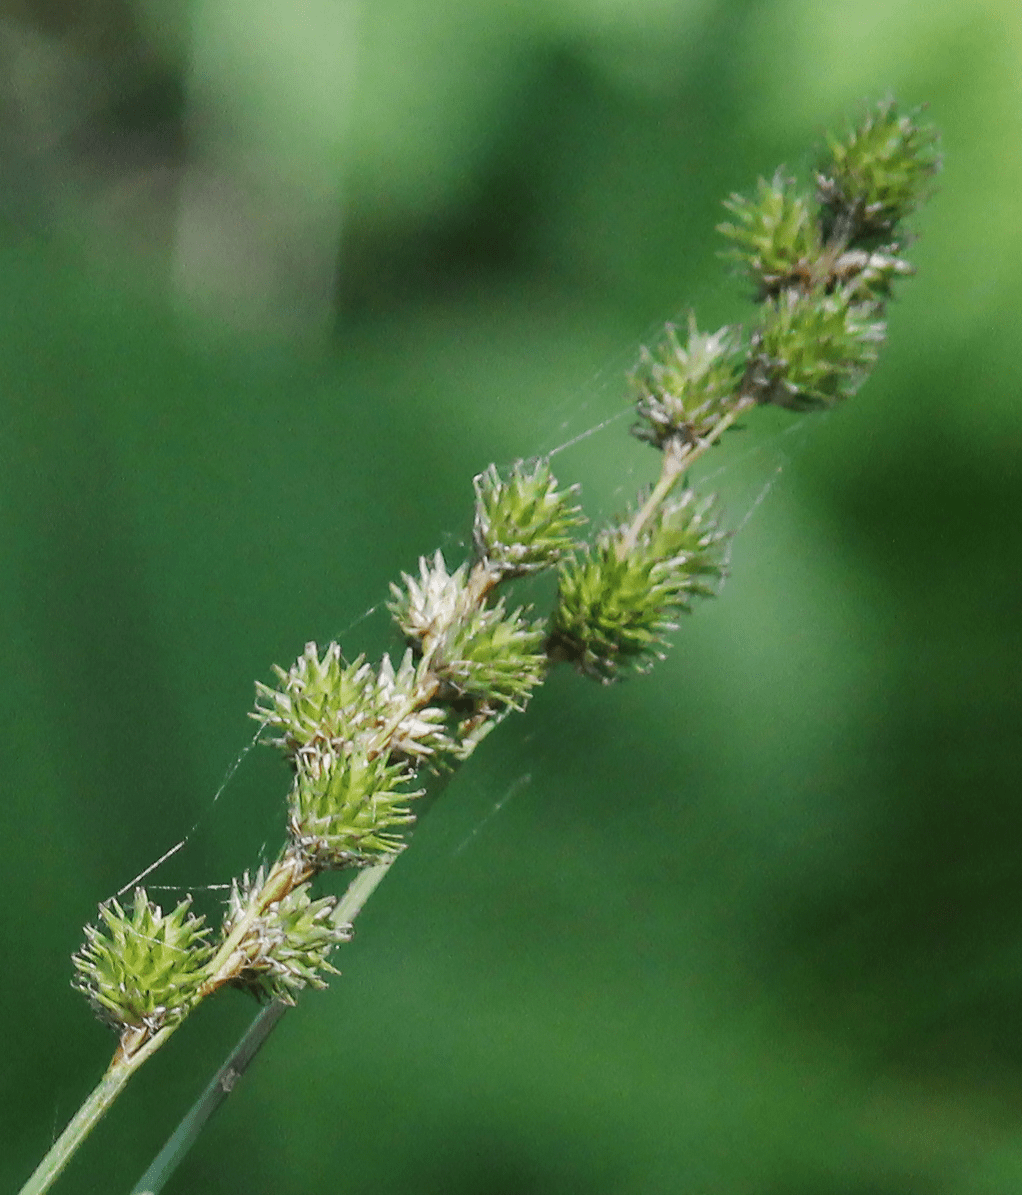 Lime-beige spikelet with beige stems.
.